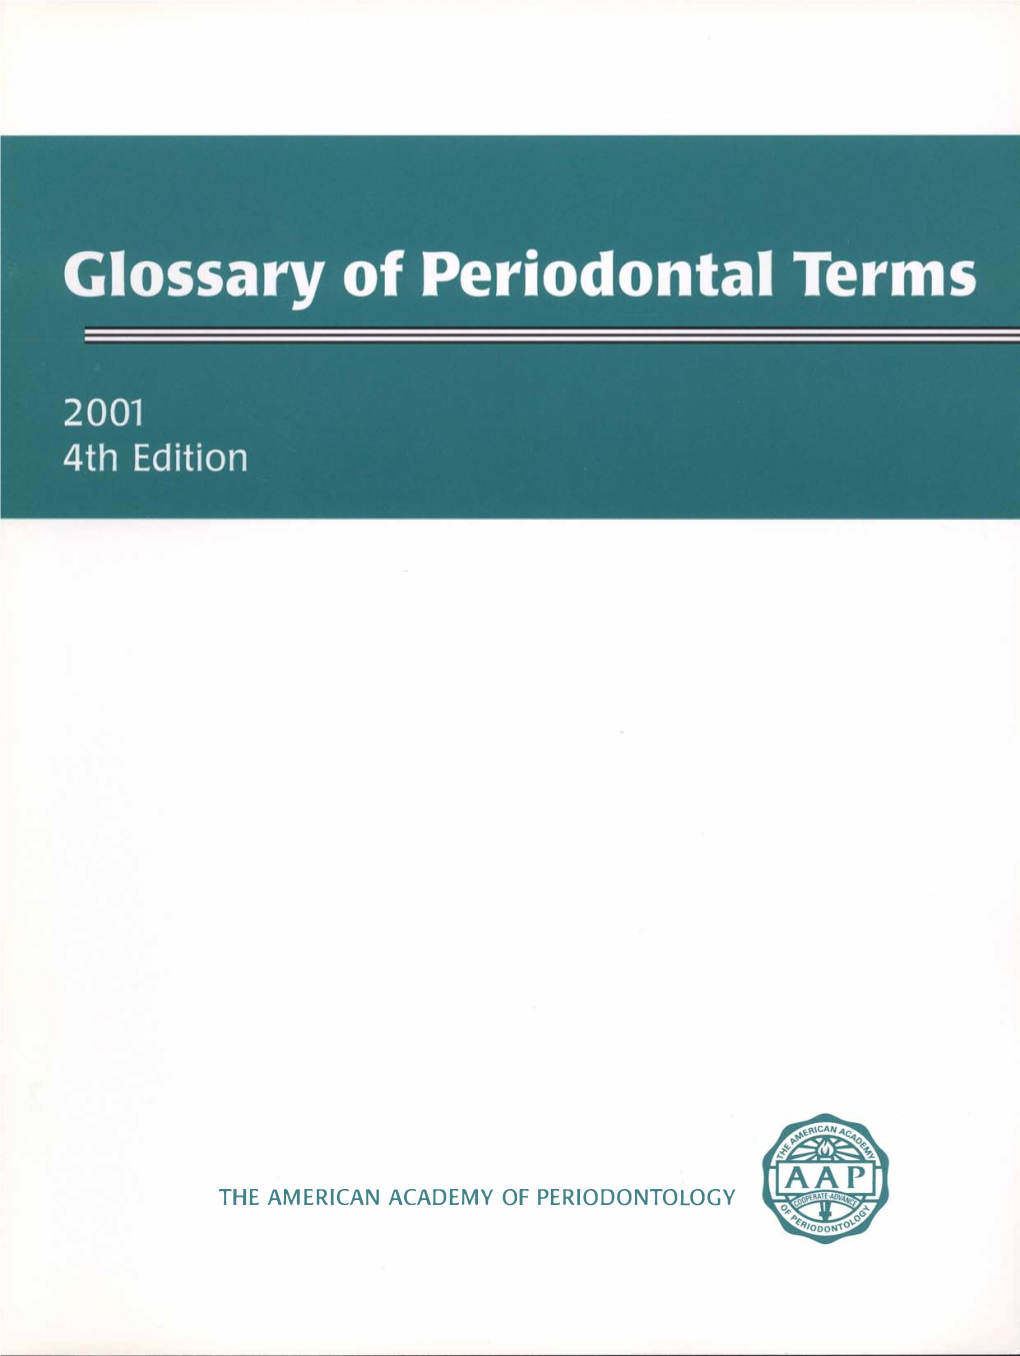 Glossary of Periodontal Terms.Pdf